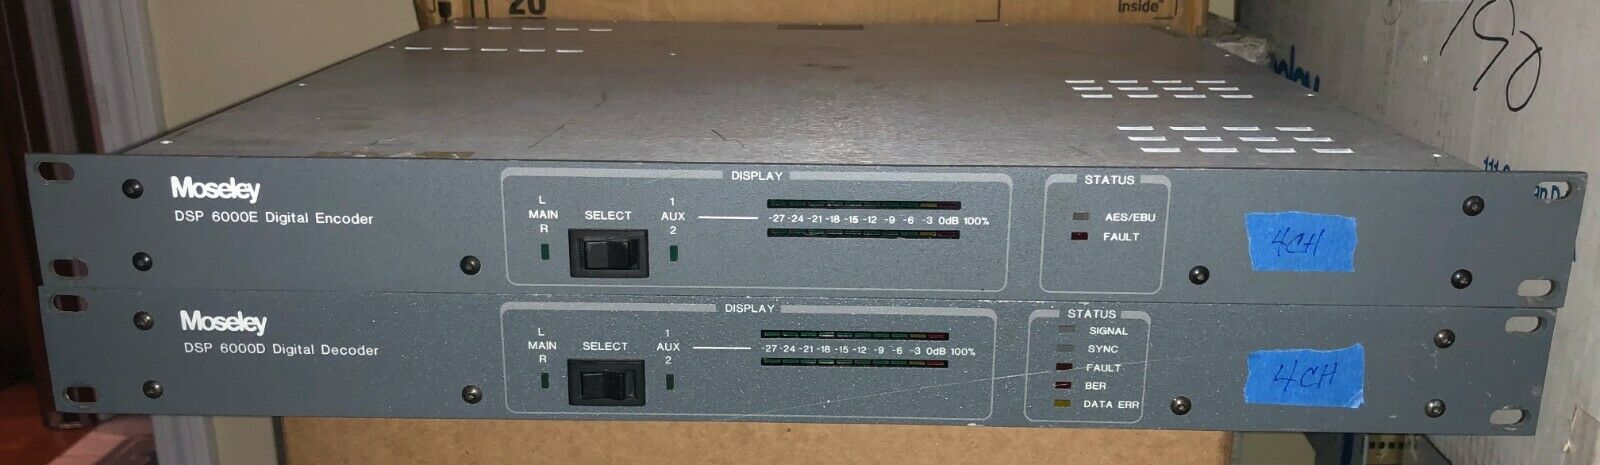 MOSELEY DSP 6000 SYSTEM 4CH ENCODER & DECODER THE HOLY GRAIL OF THE DSP'S! STL